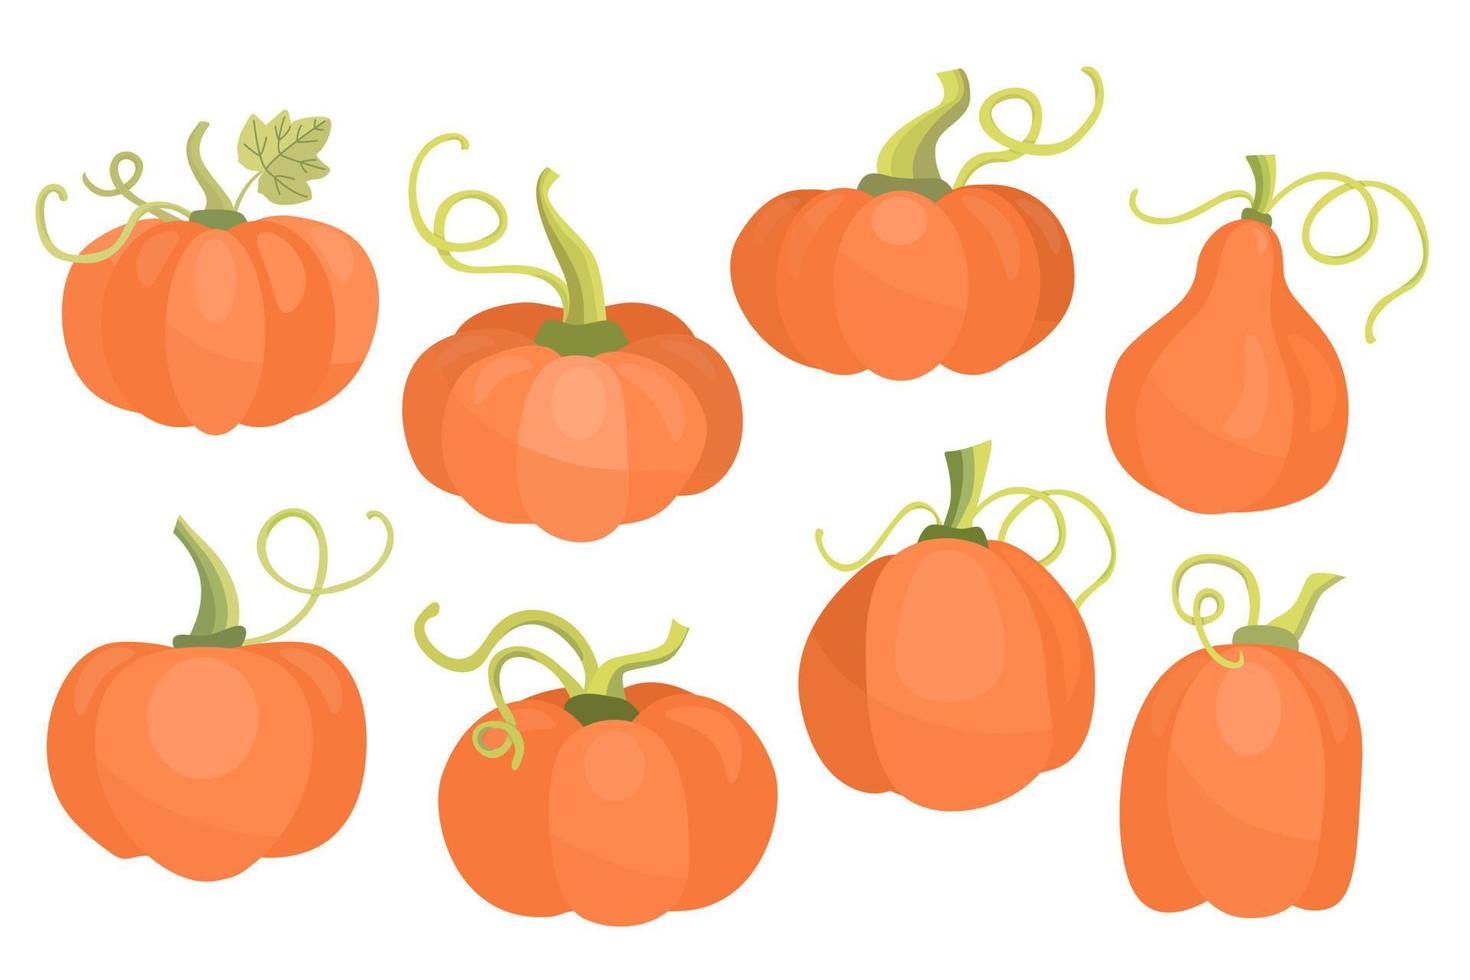 Pumpkins set. Hand drawn flat vector illustration. Great for creating stickers, posters, autumn Halloween and Thanksgiving cards